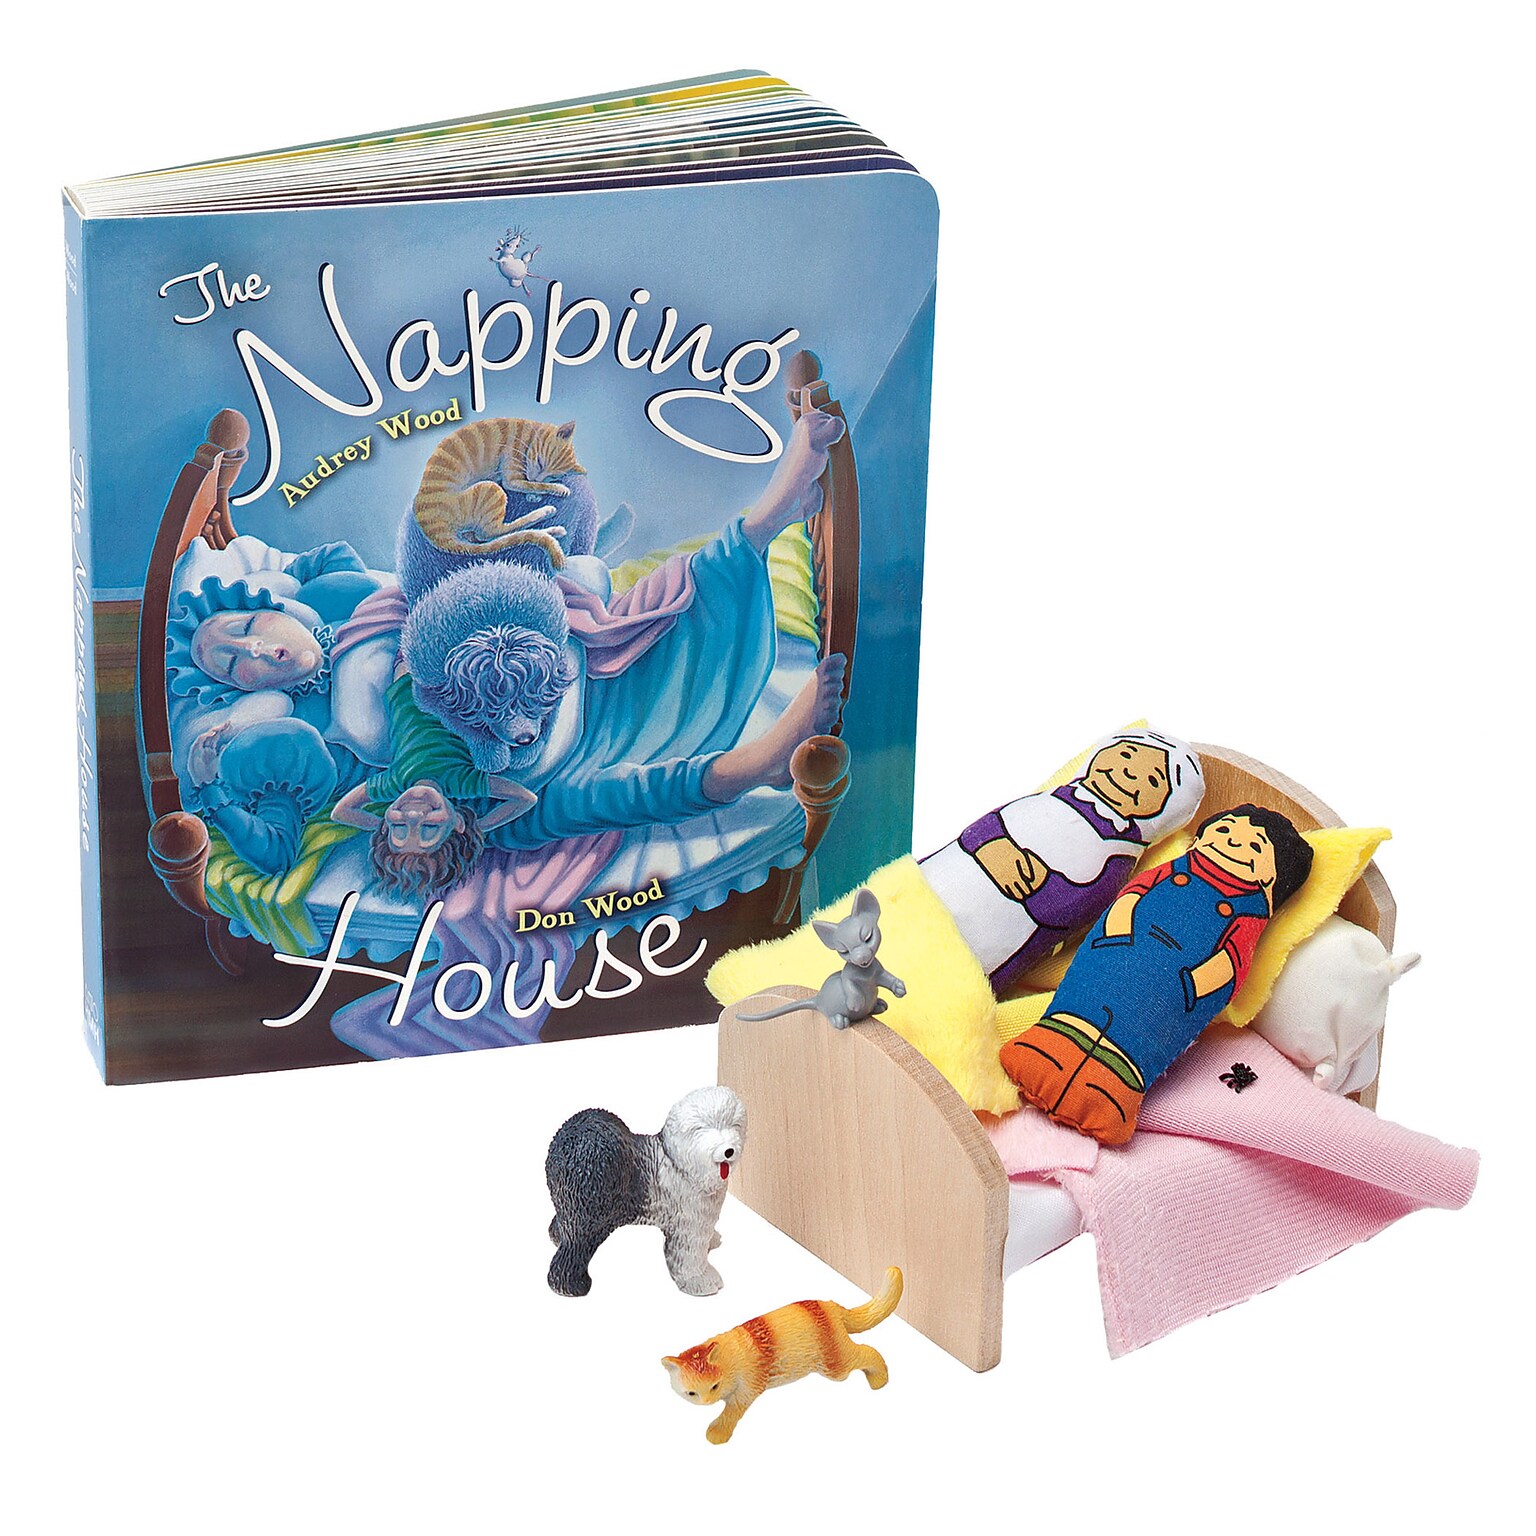 Primary Concepts The Napping House 3-D Storybook, Grade PK-K (PC-1642)